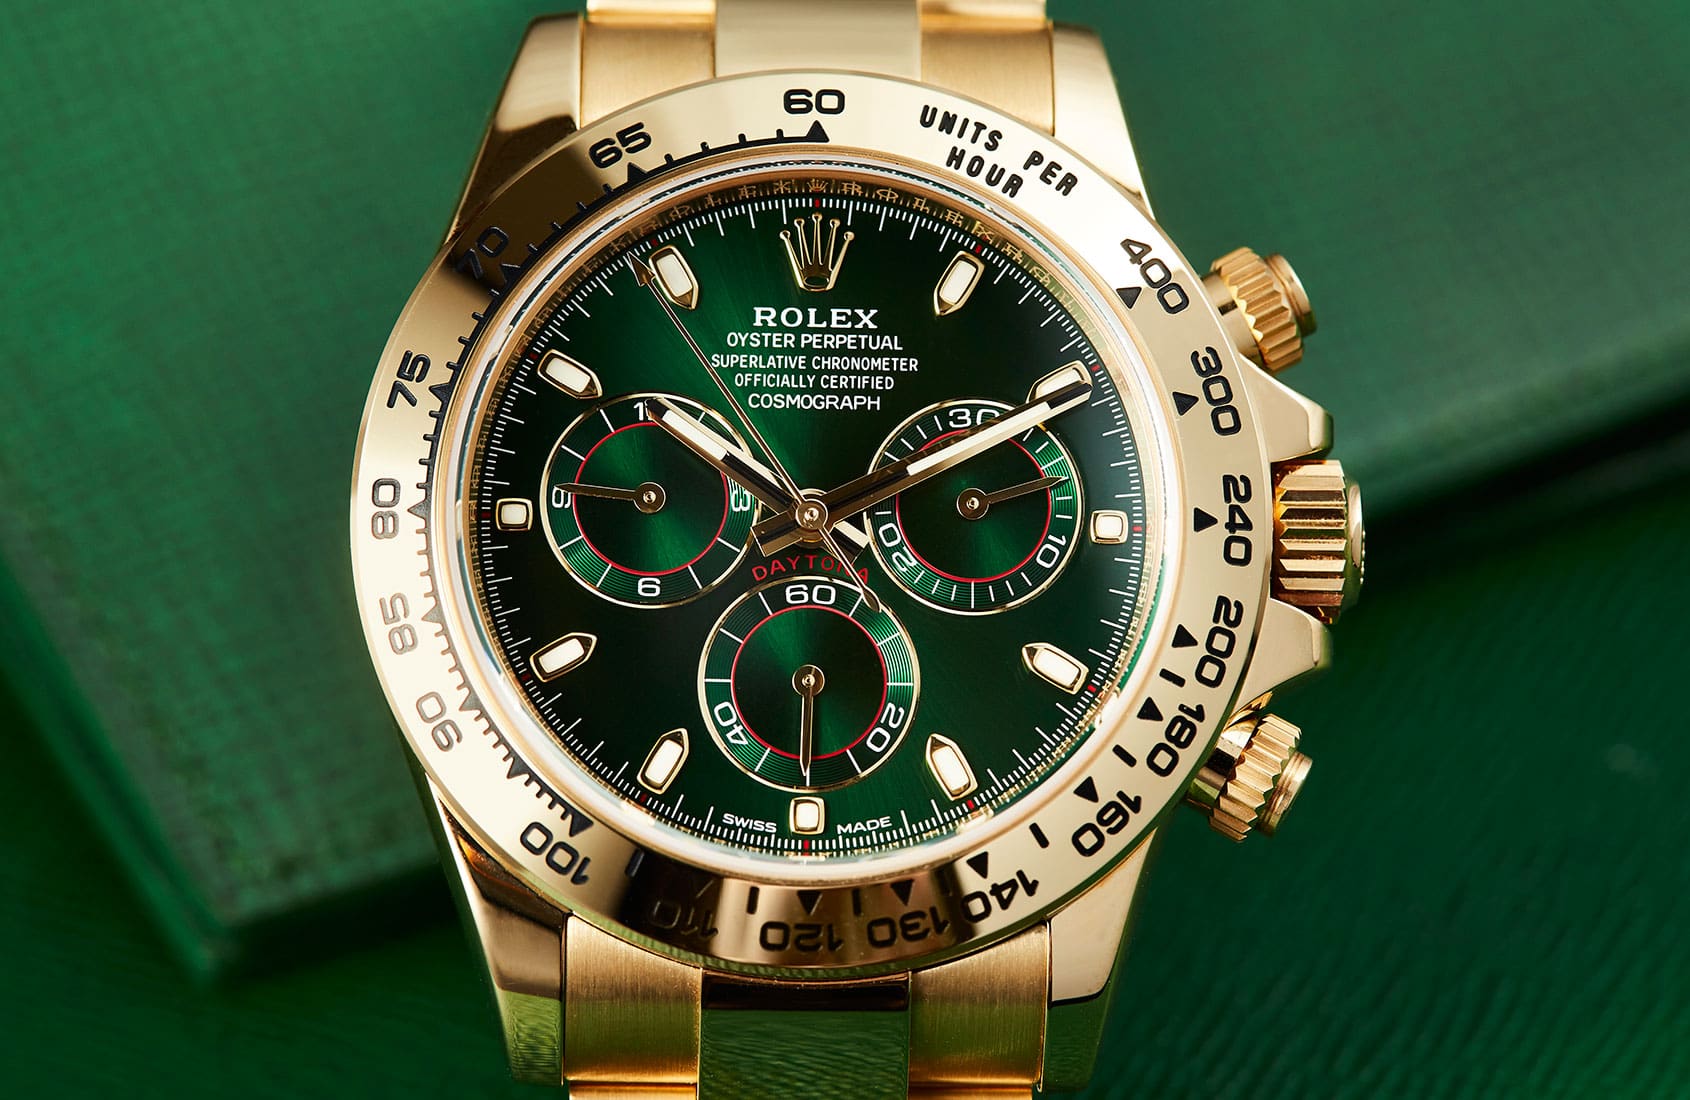 HANDS-ON: Everlasting lustre – the Rolex Daytona in yellow gold with green dial (ref. 116508)